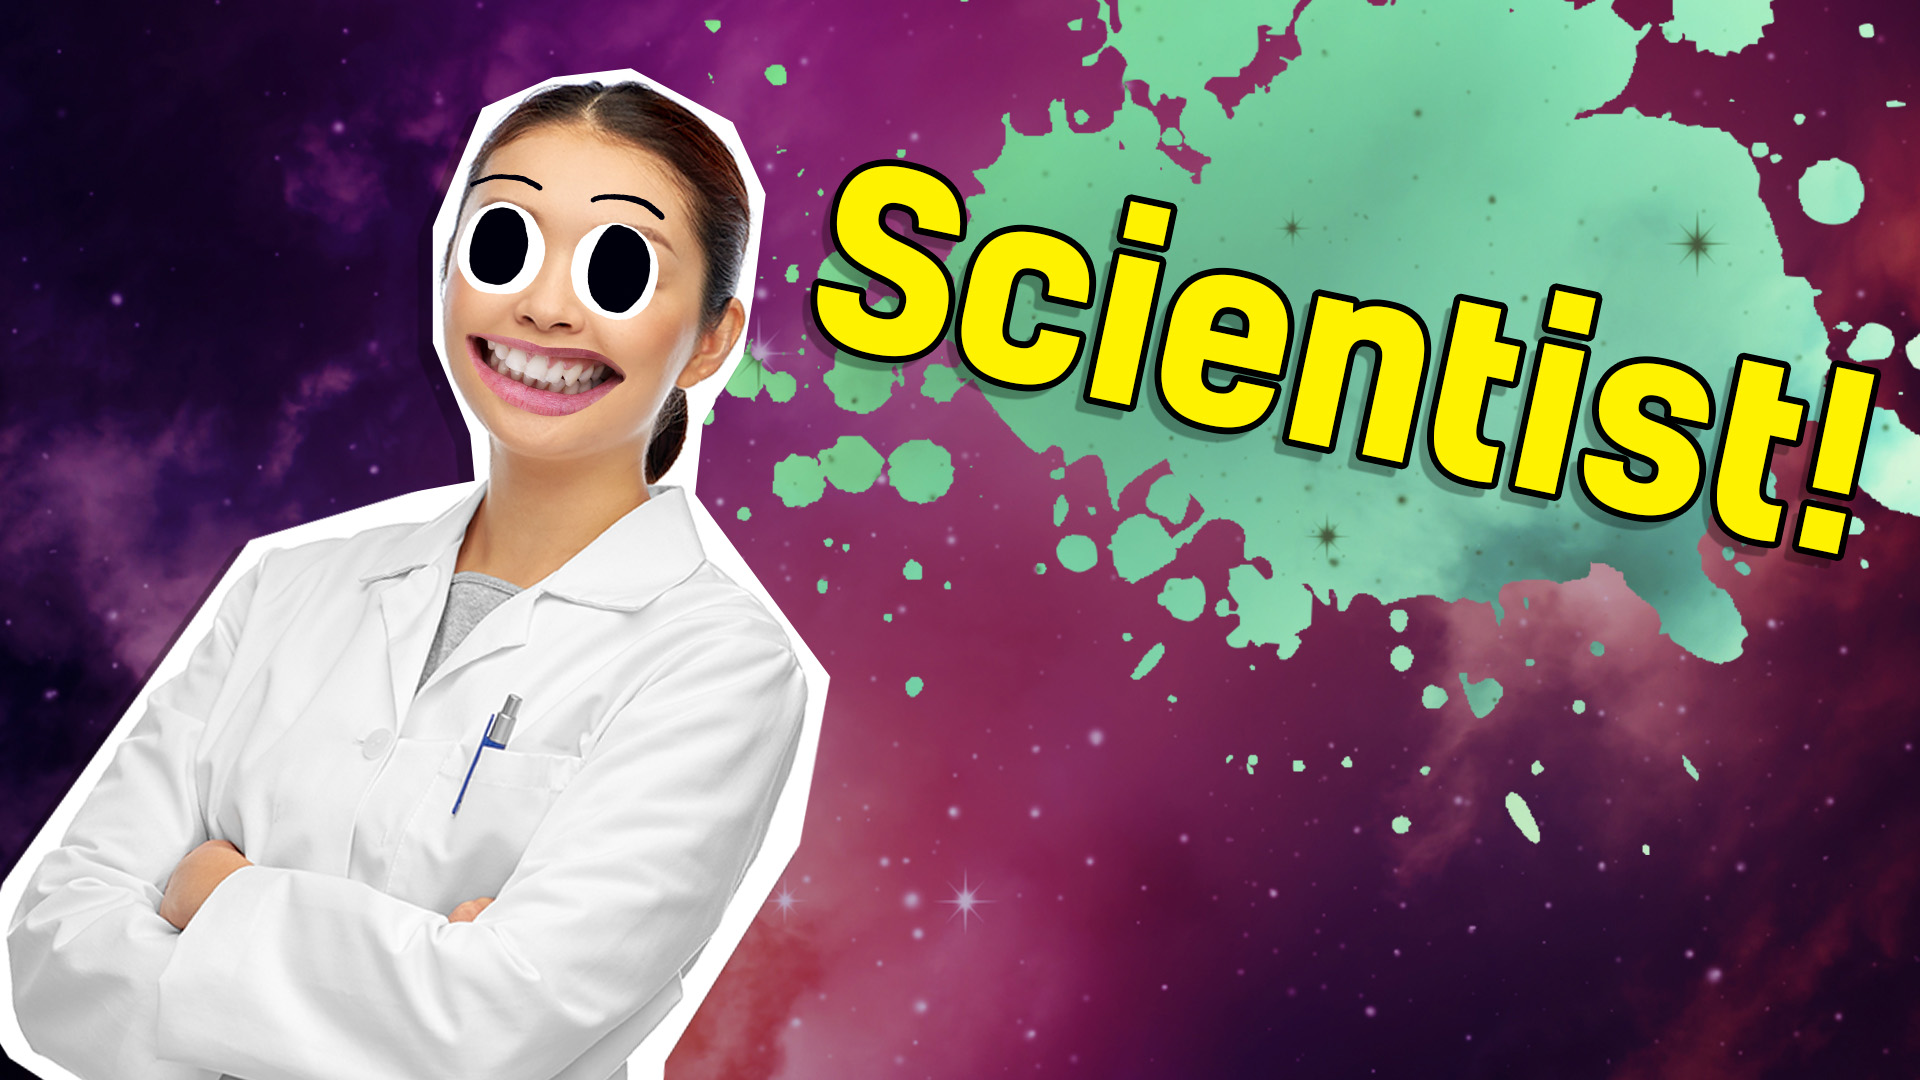 You should be a scientist!